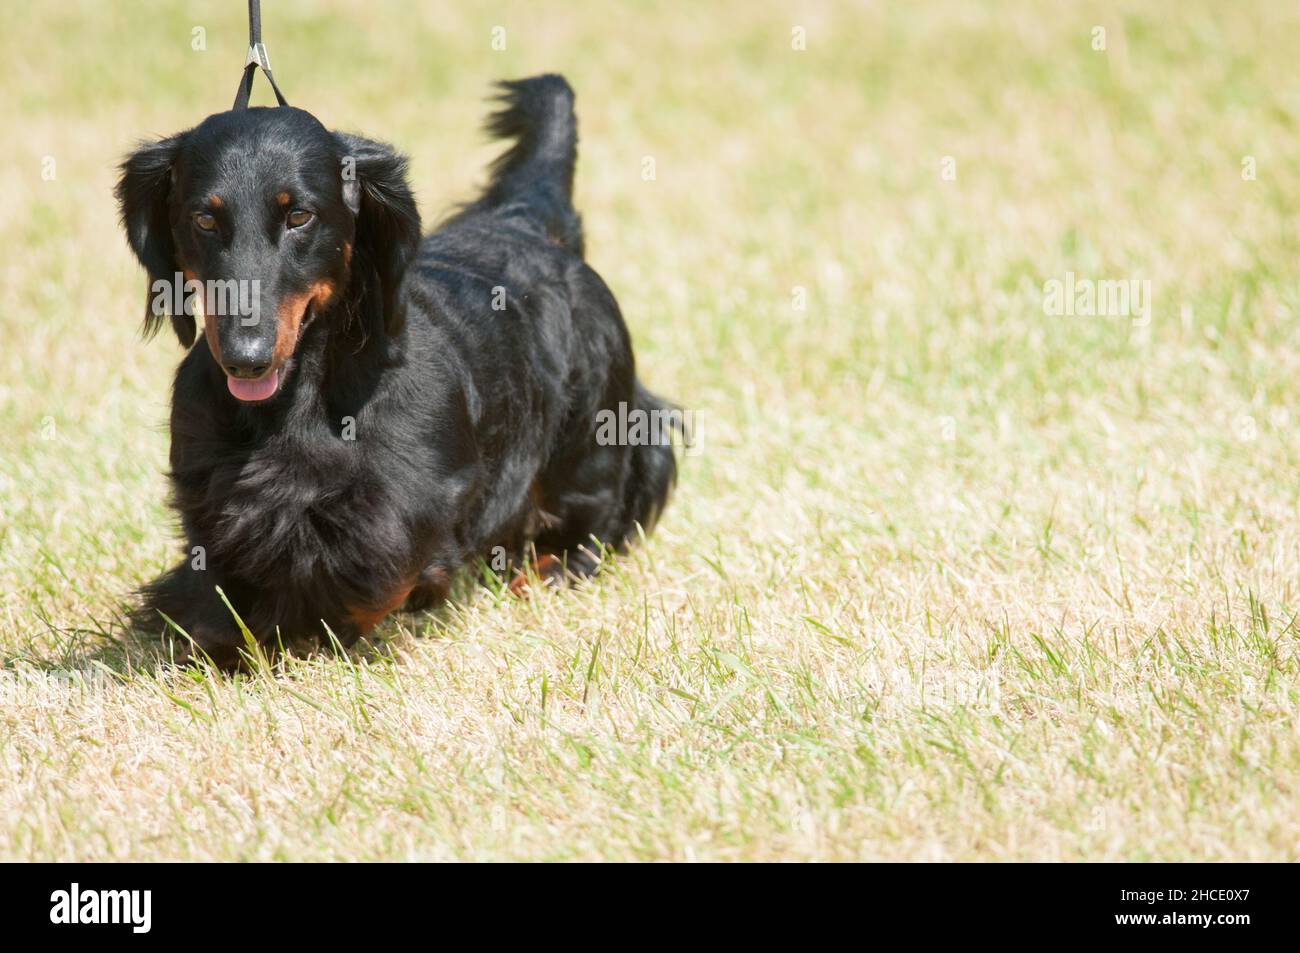 Longhaired Dachshund walking on grass field at a dog show Stock Photo